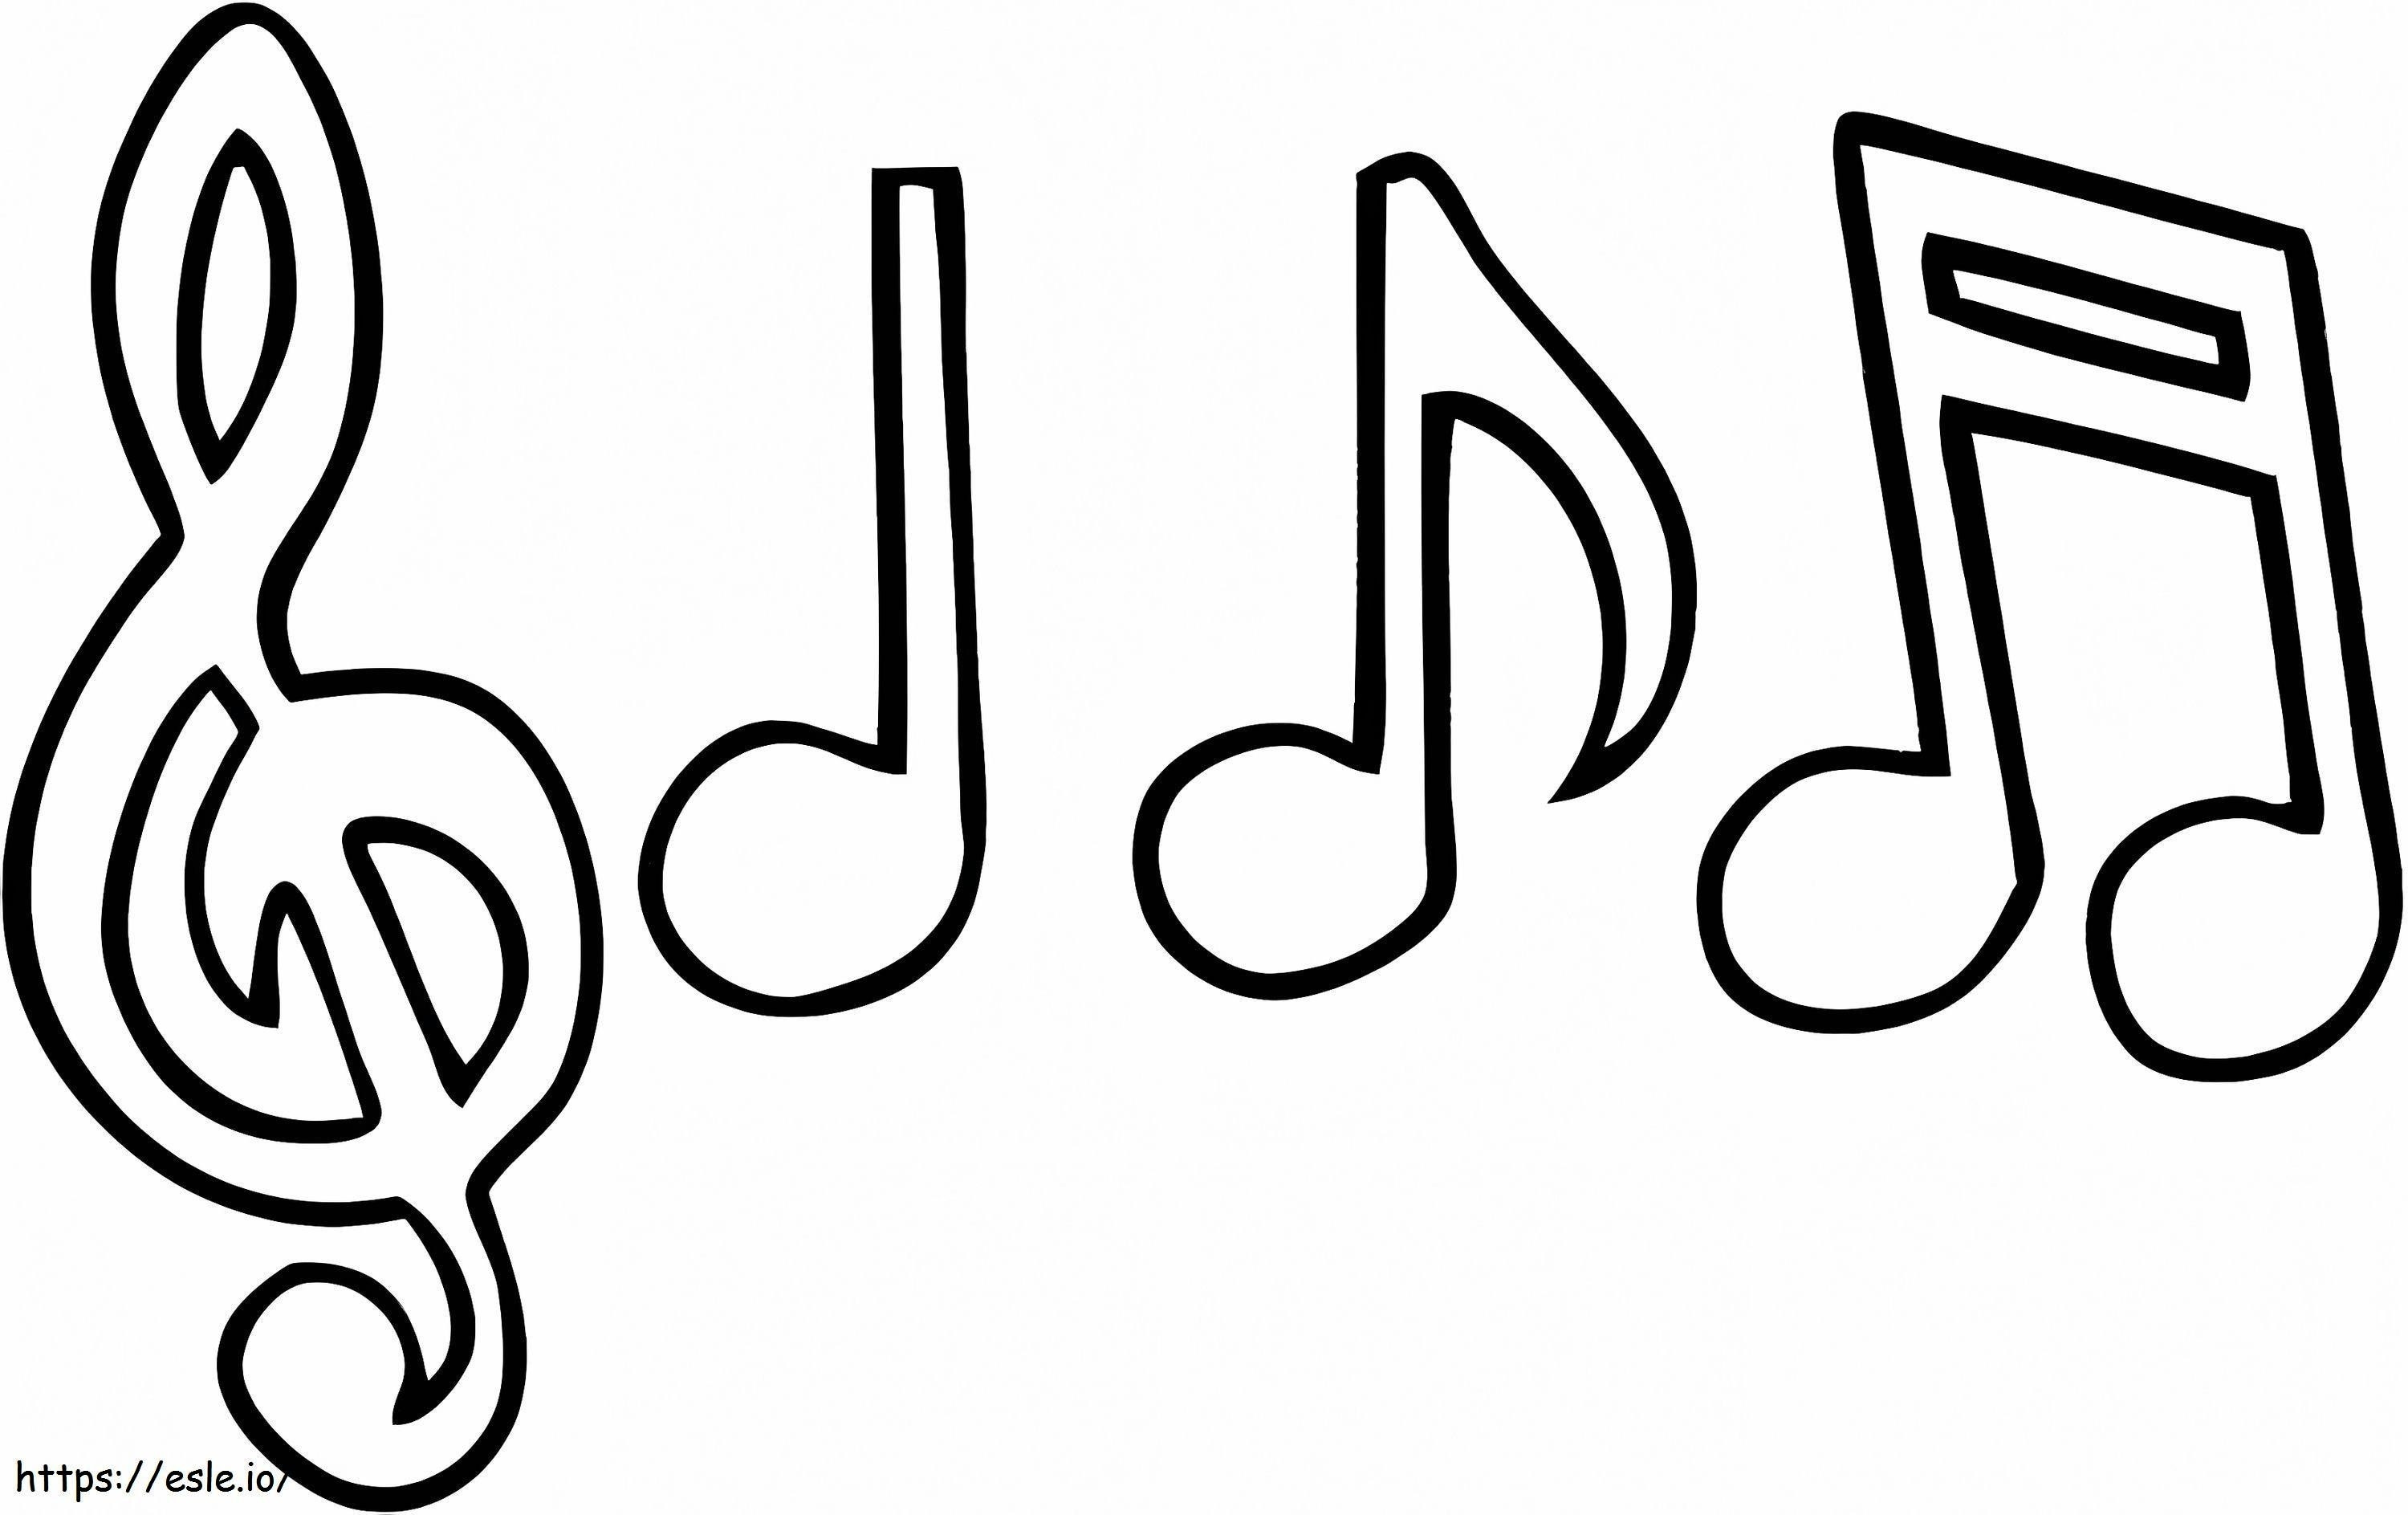 Incredible Musical Note 2 coloring page